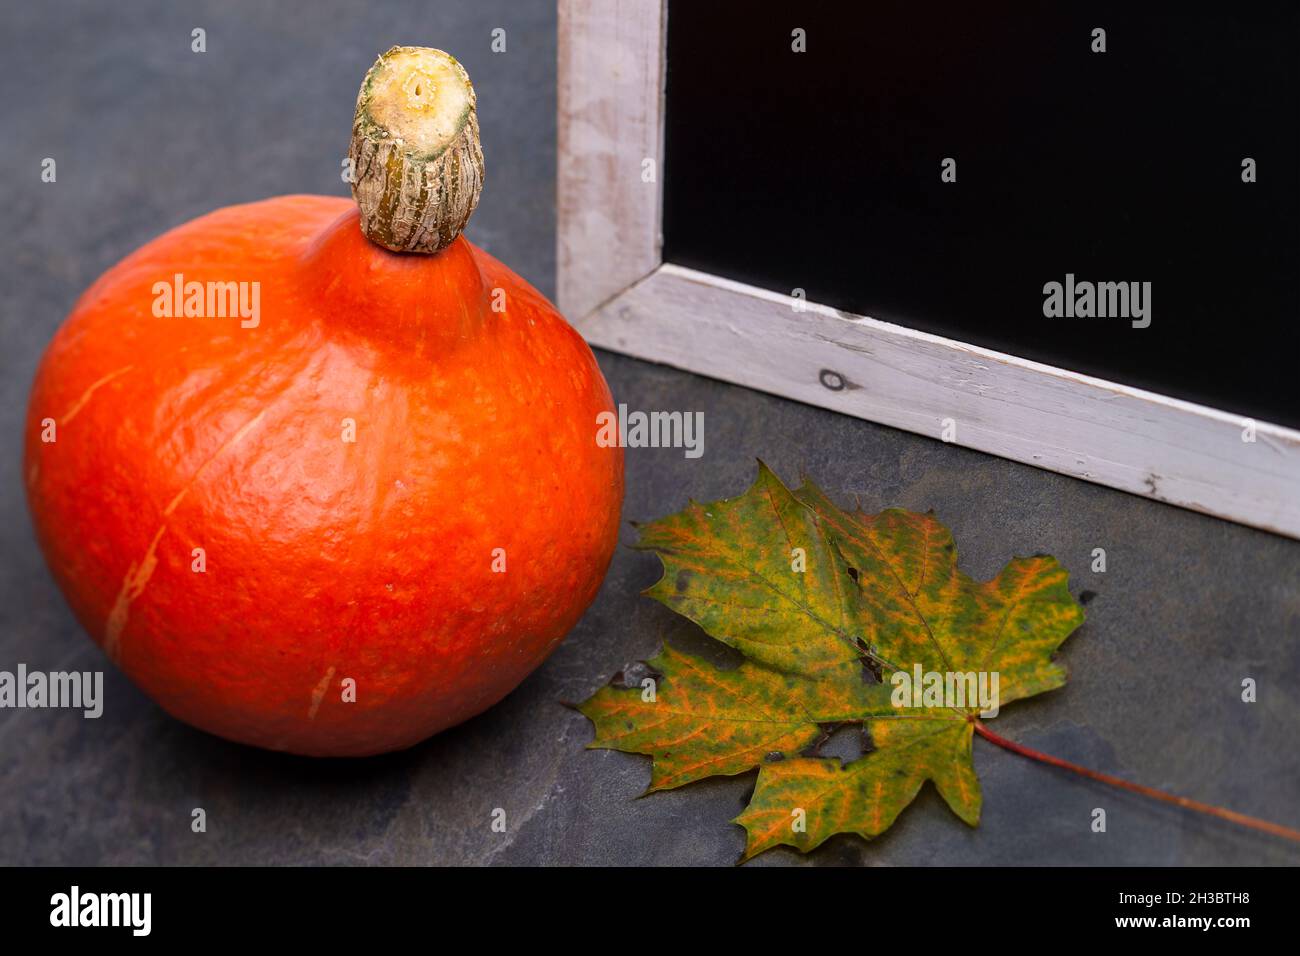 The photo shows an orange Hokkaido pumpkin with a leaf and a chalkboard with gray background Stock Photo